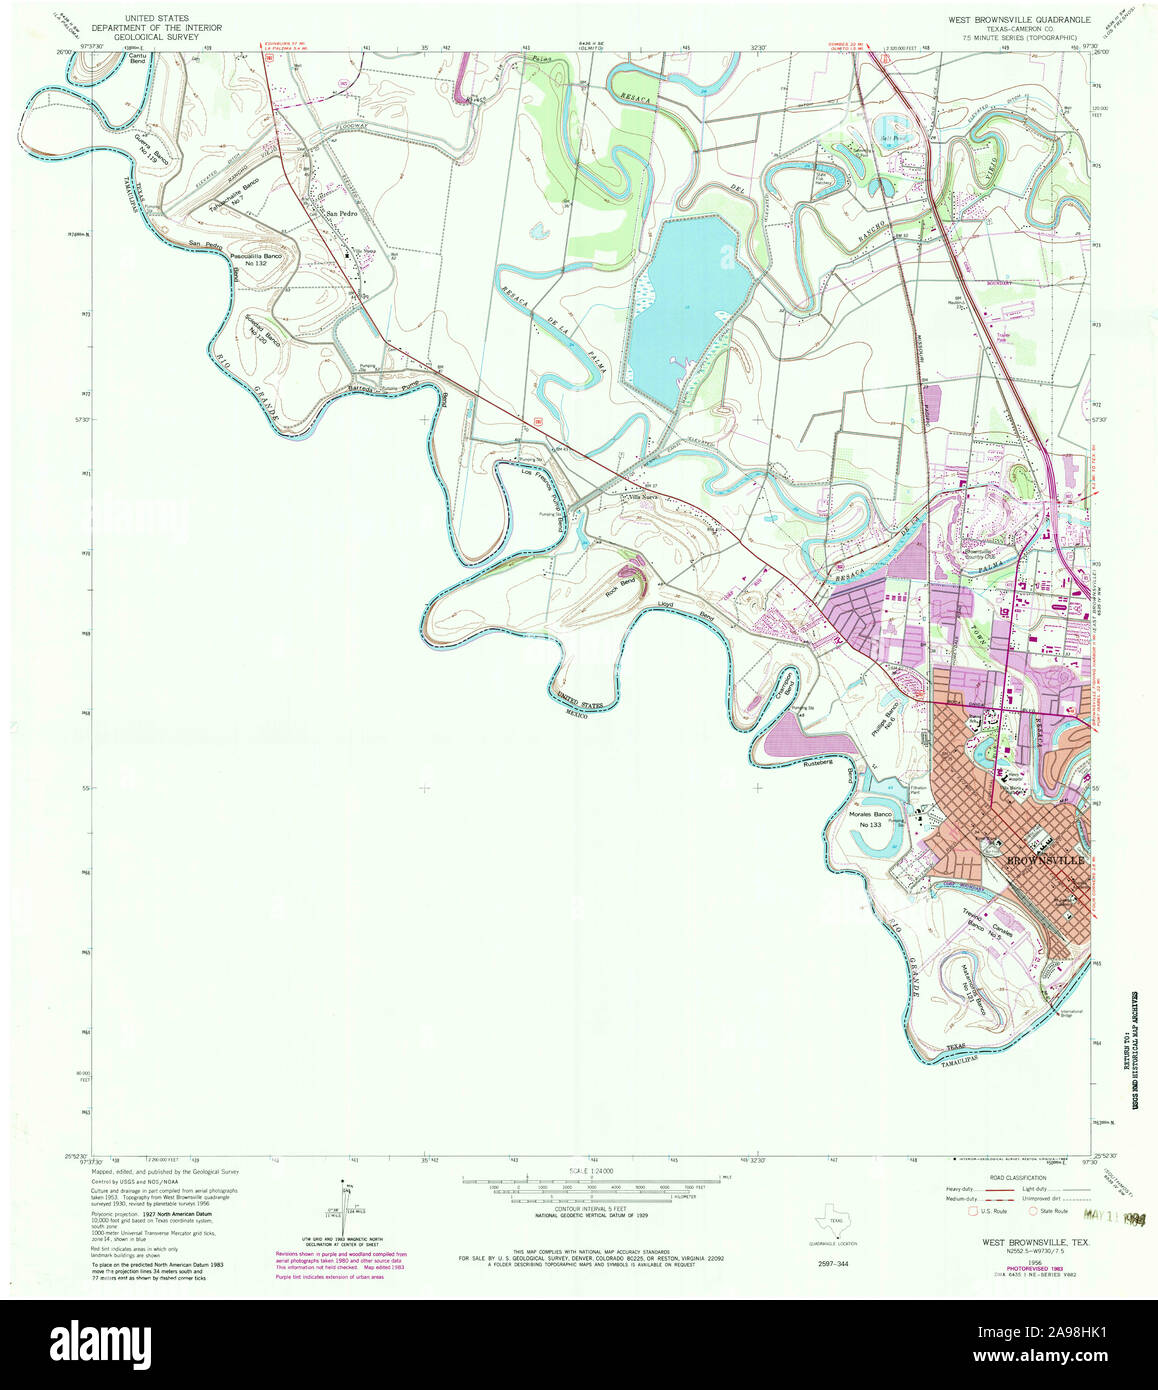 USGS TOPO Map Texas TX West Brownsville 117058 1956 24000 Stock Photo